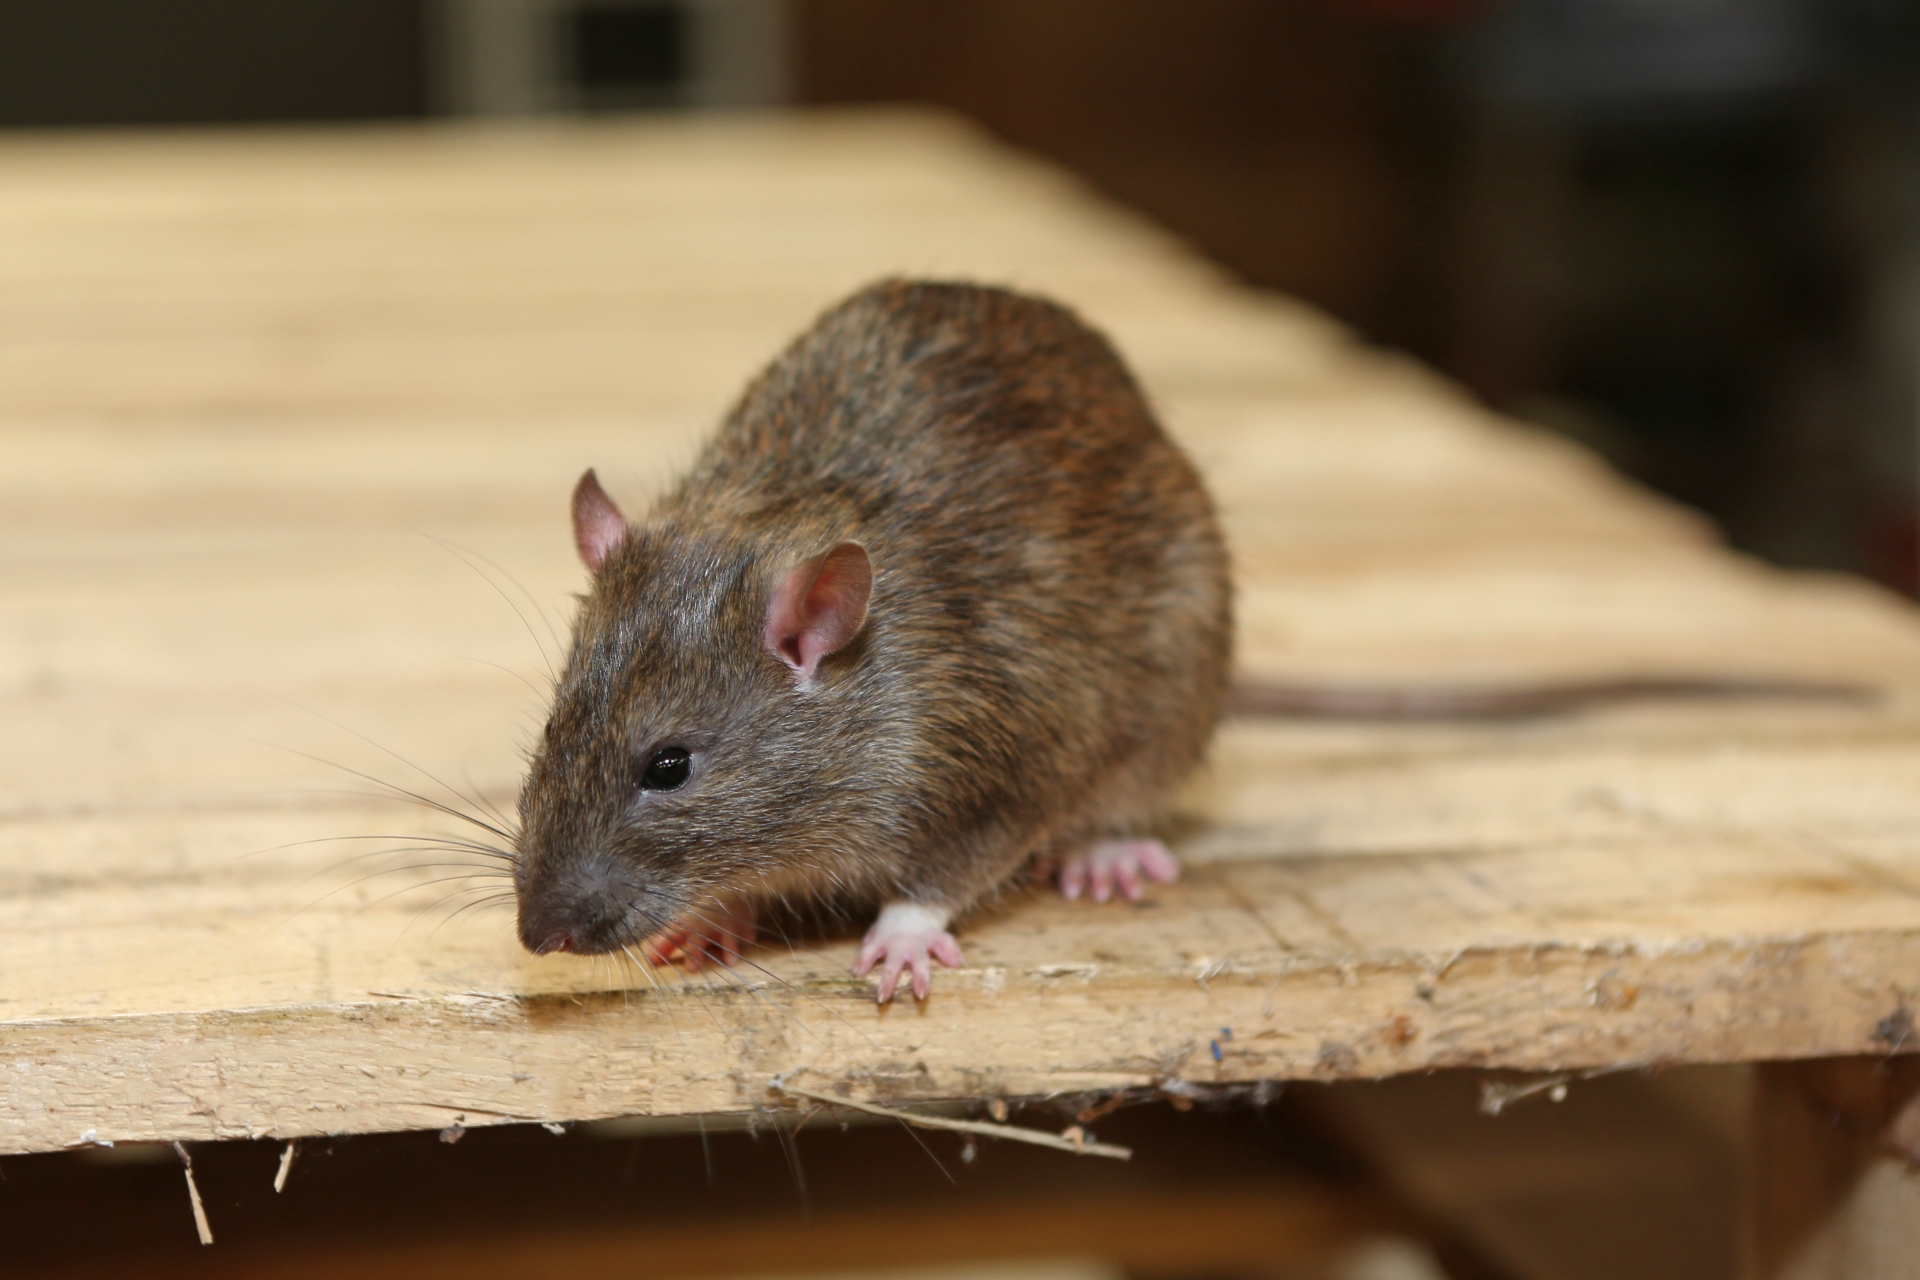 Rat extermination, Pest Control in Waterloo, SE1. Call Now 020 8166 9746